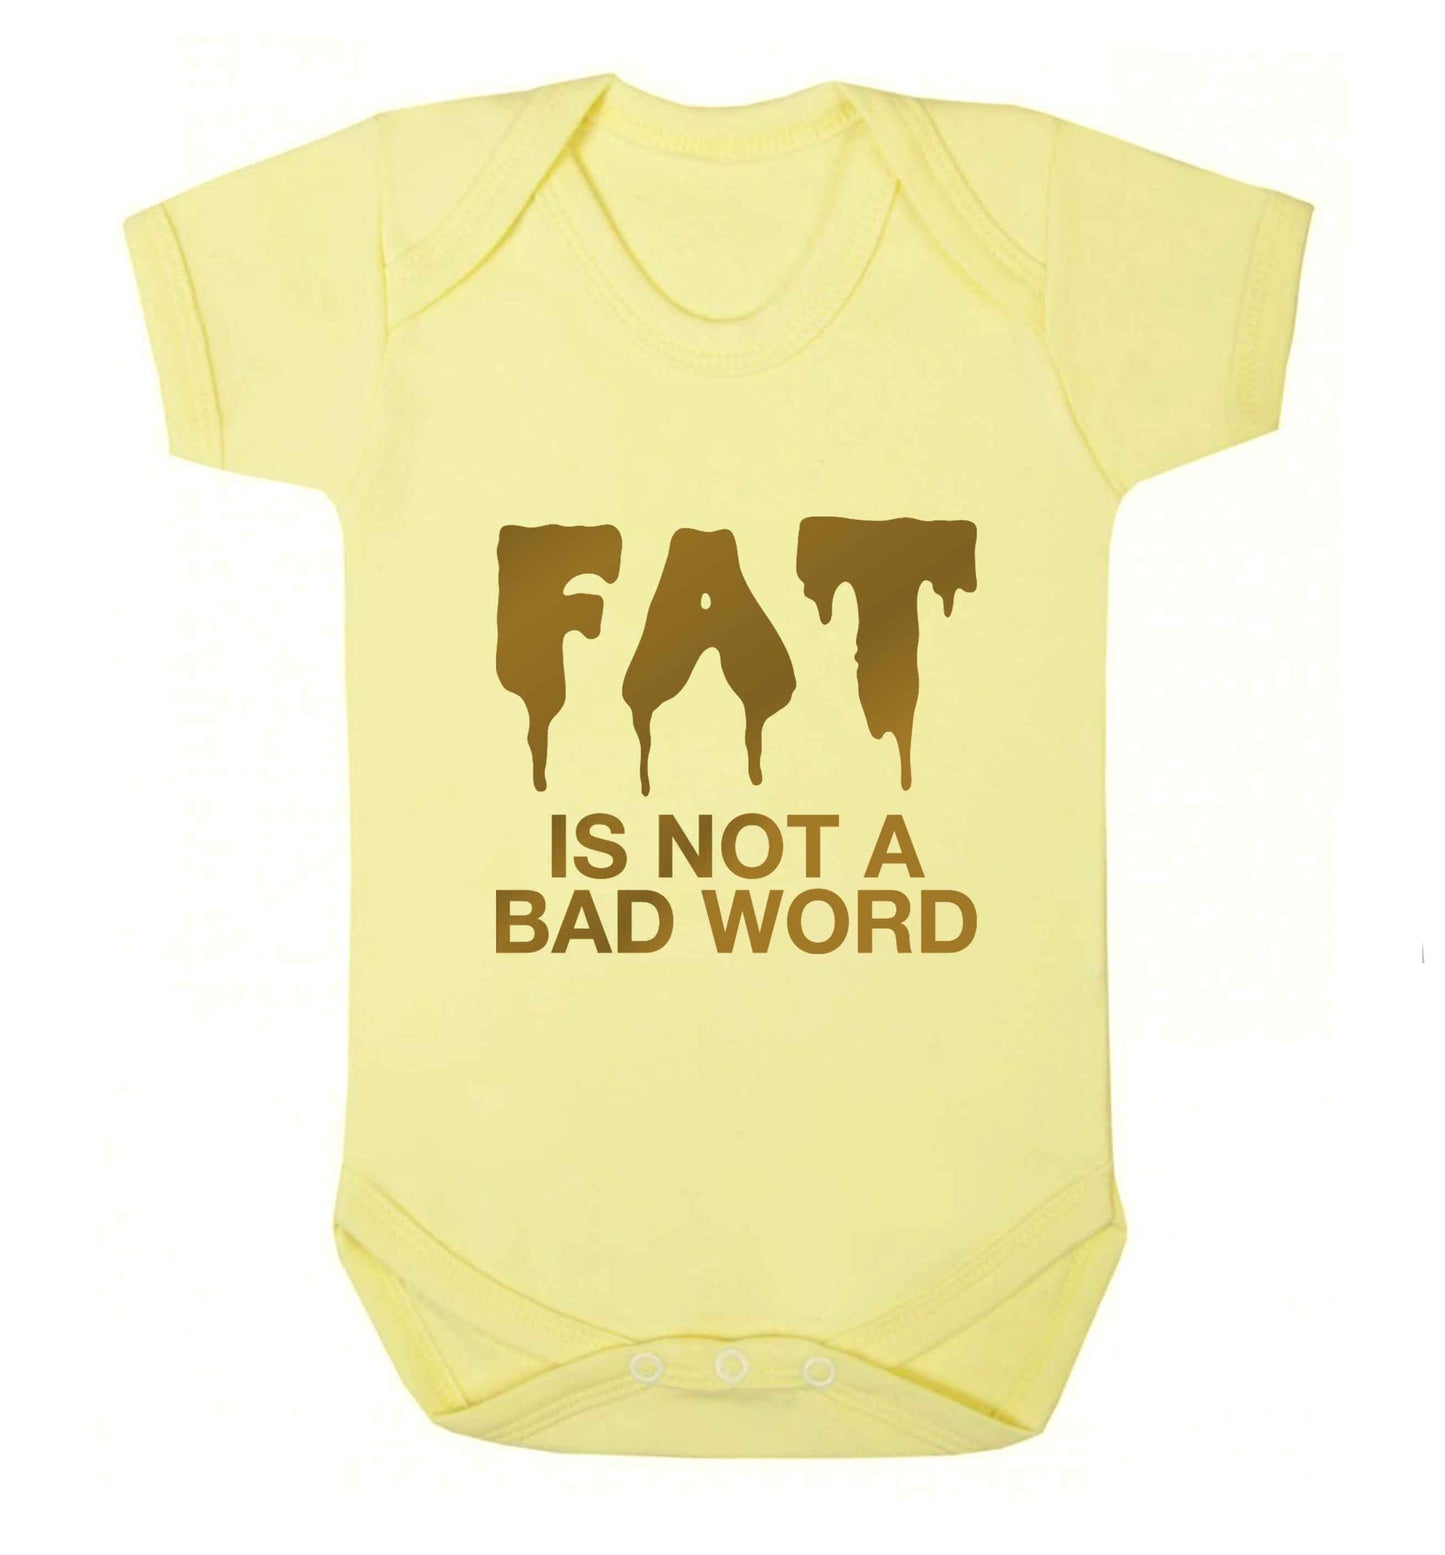 Fat is not a bad word baby vest pale yellow 18-24 months